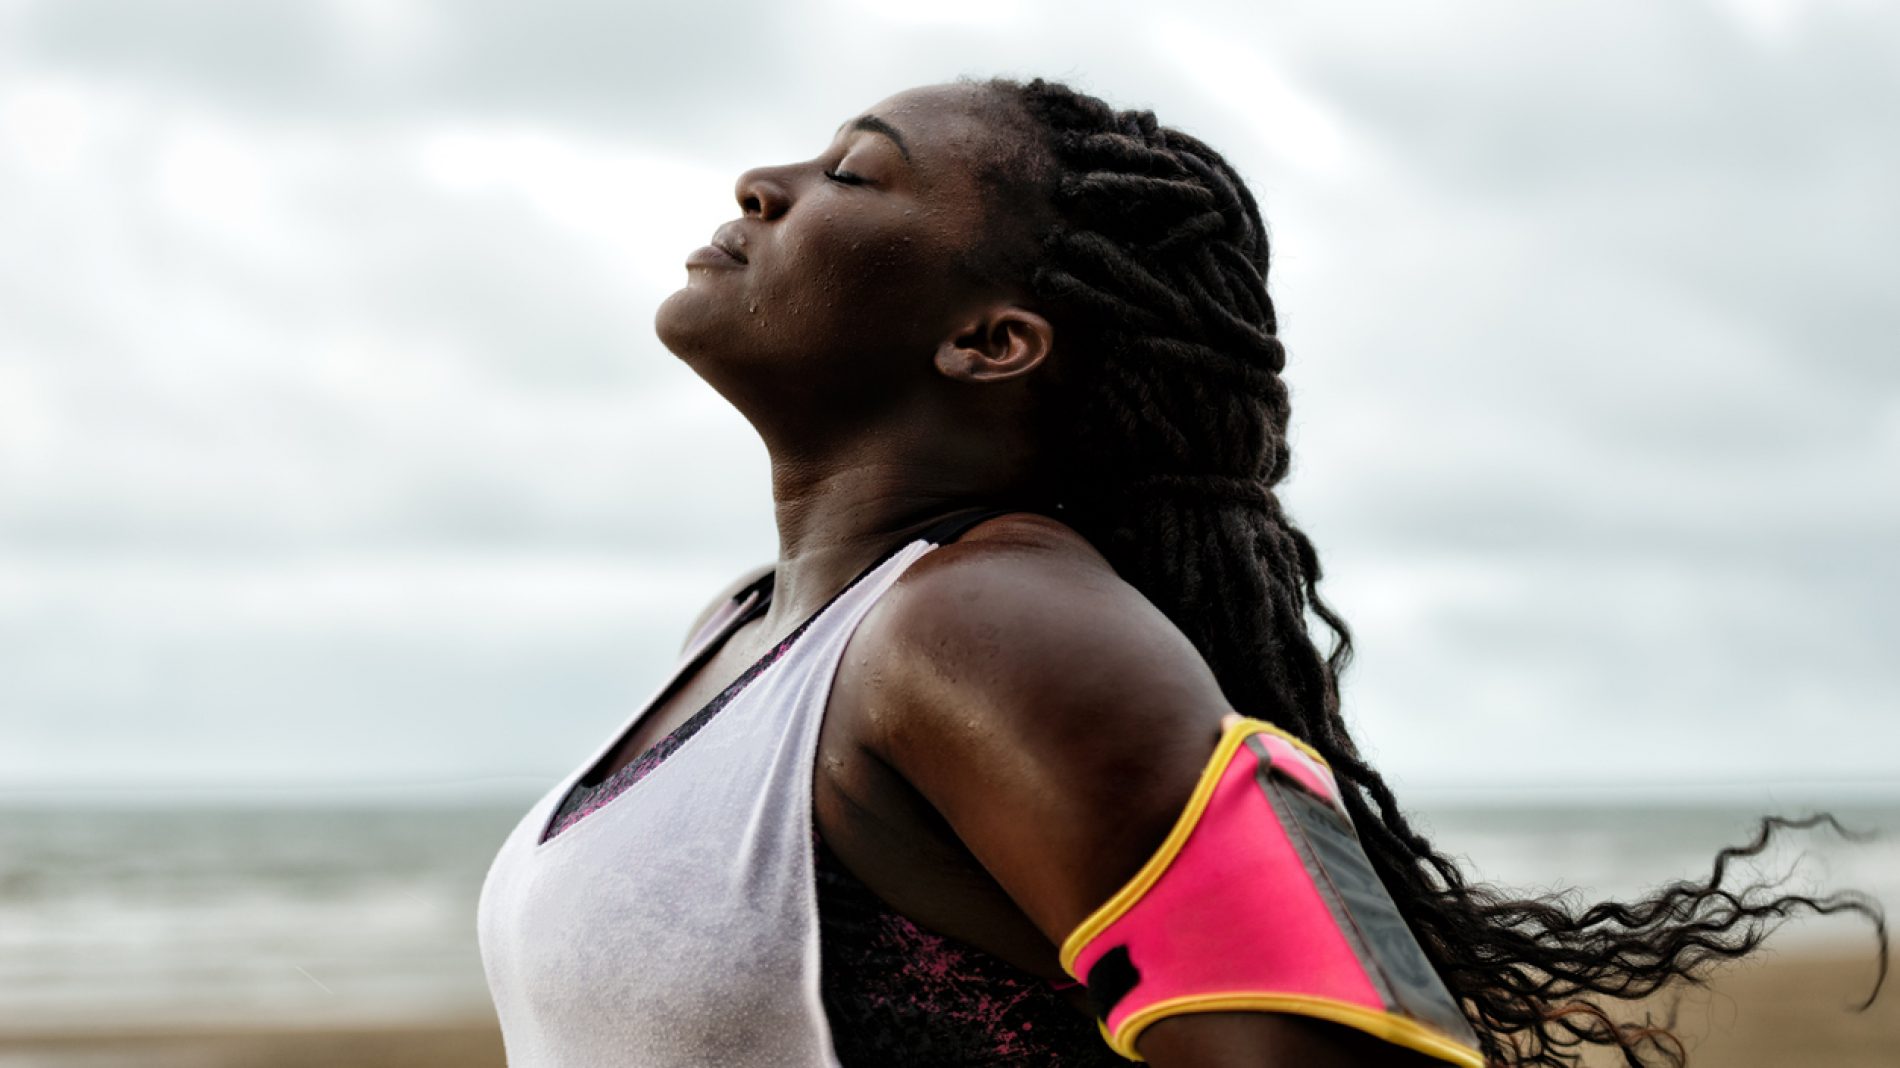 african woman standing under the rain,eyes closed, after workout on beach